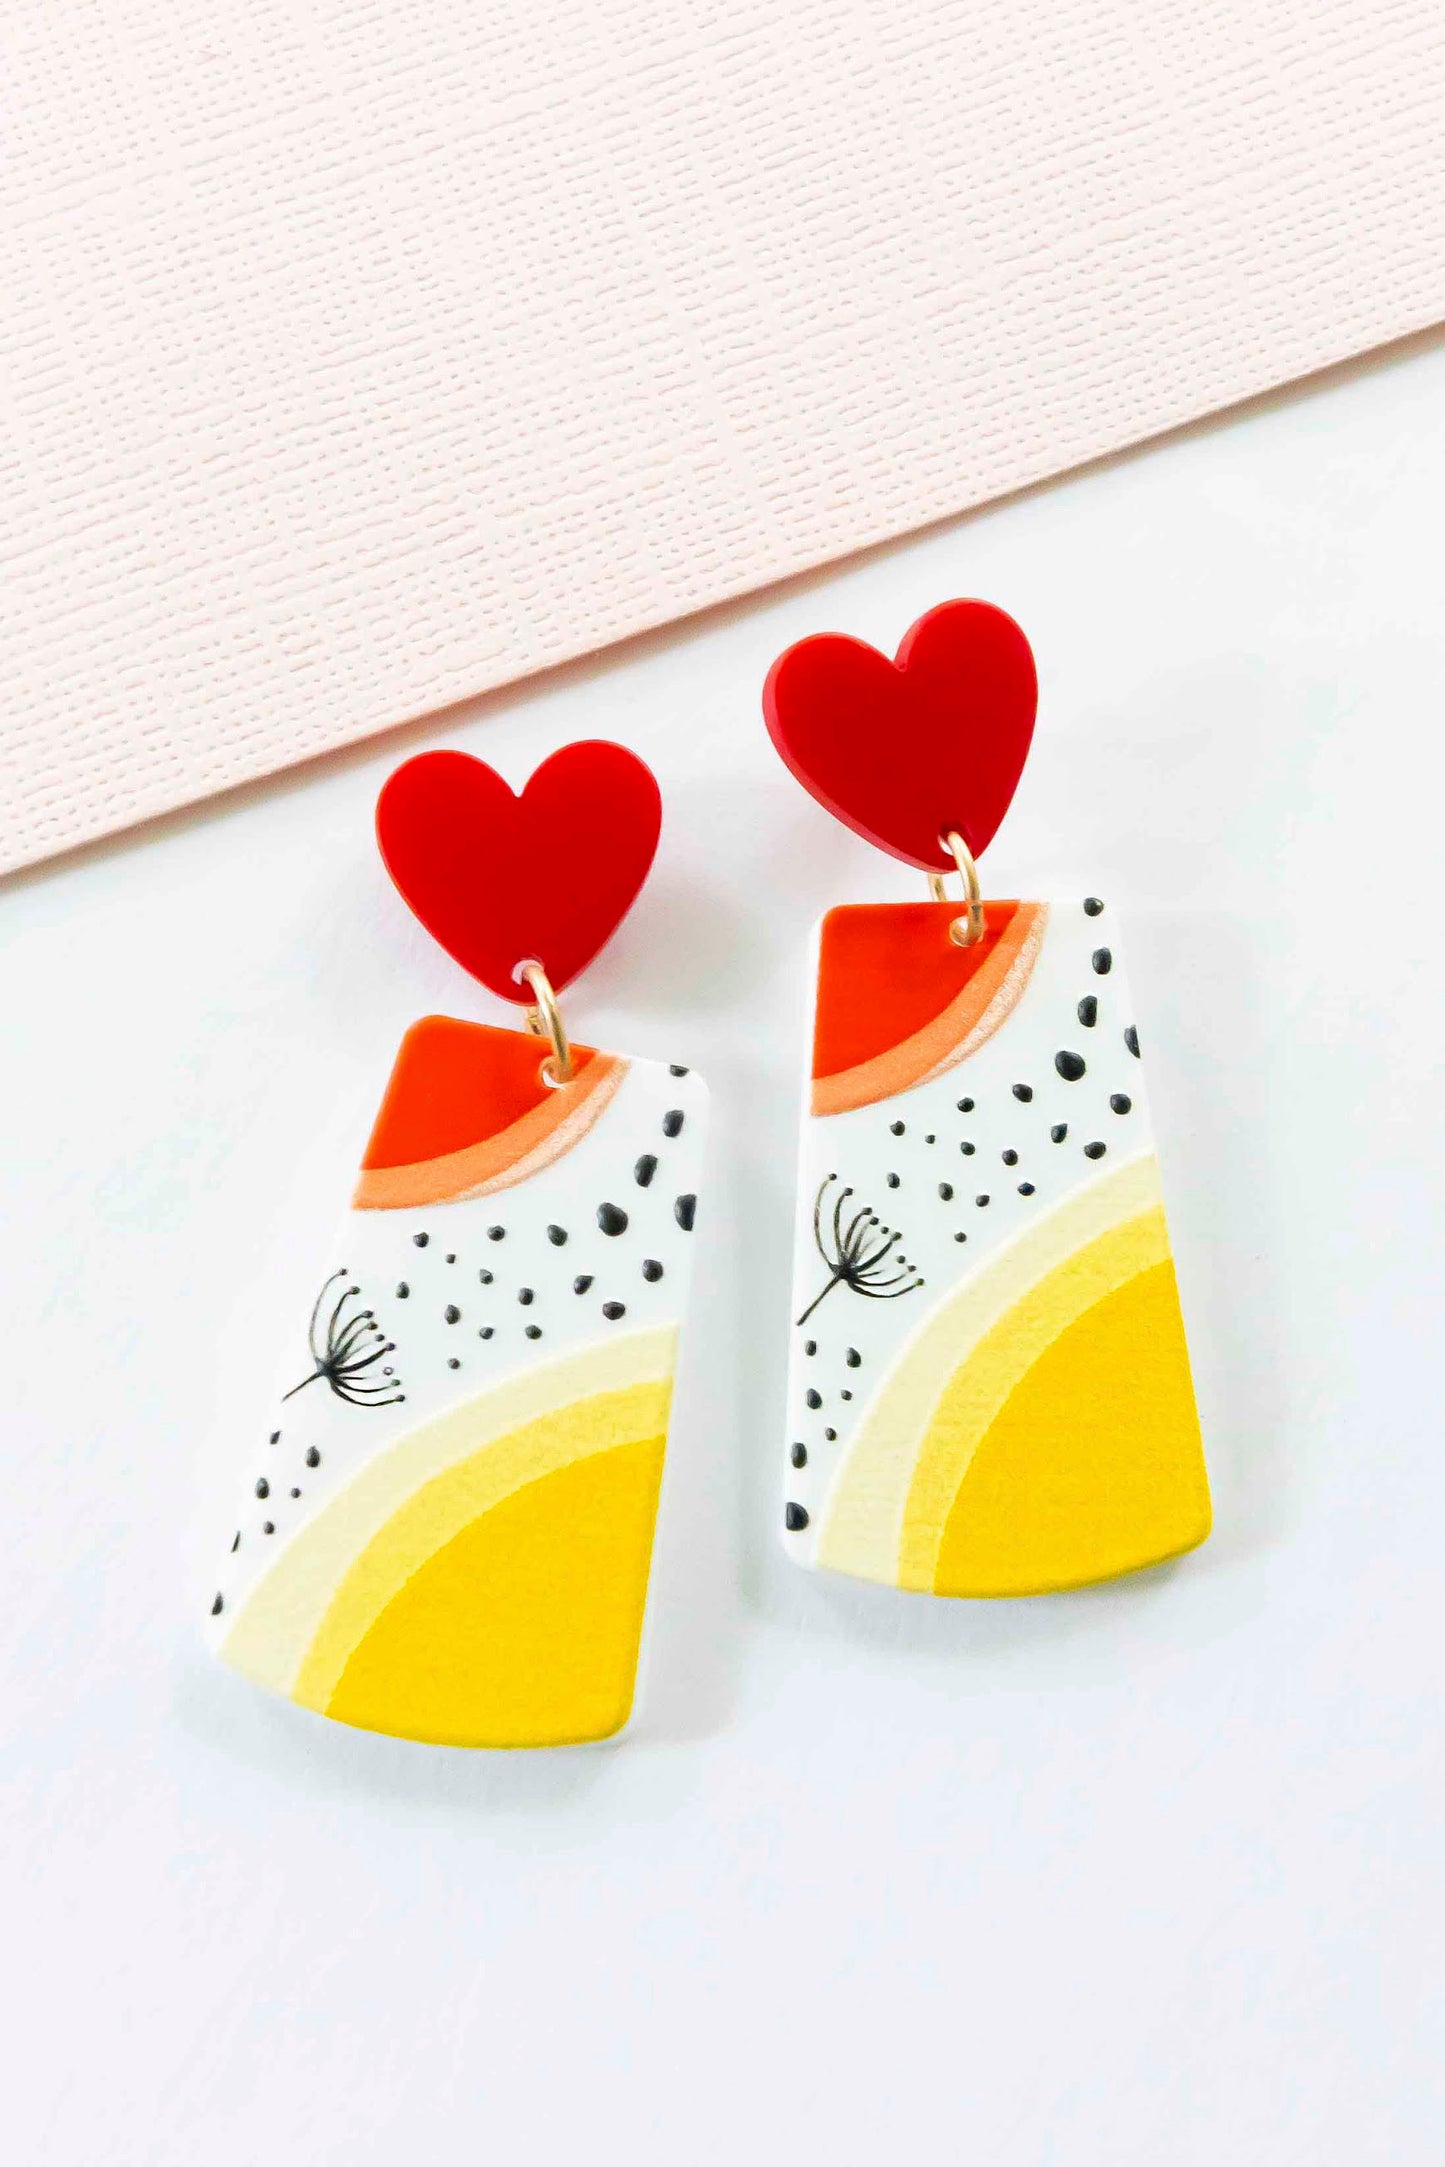 Emma Clay Drop Earrings | 2 Colors Pink and Yellow | Art Deco Clay Earrings | Colorful Artistic Drop Earrings | Modern Chic Style